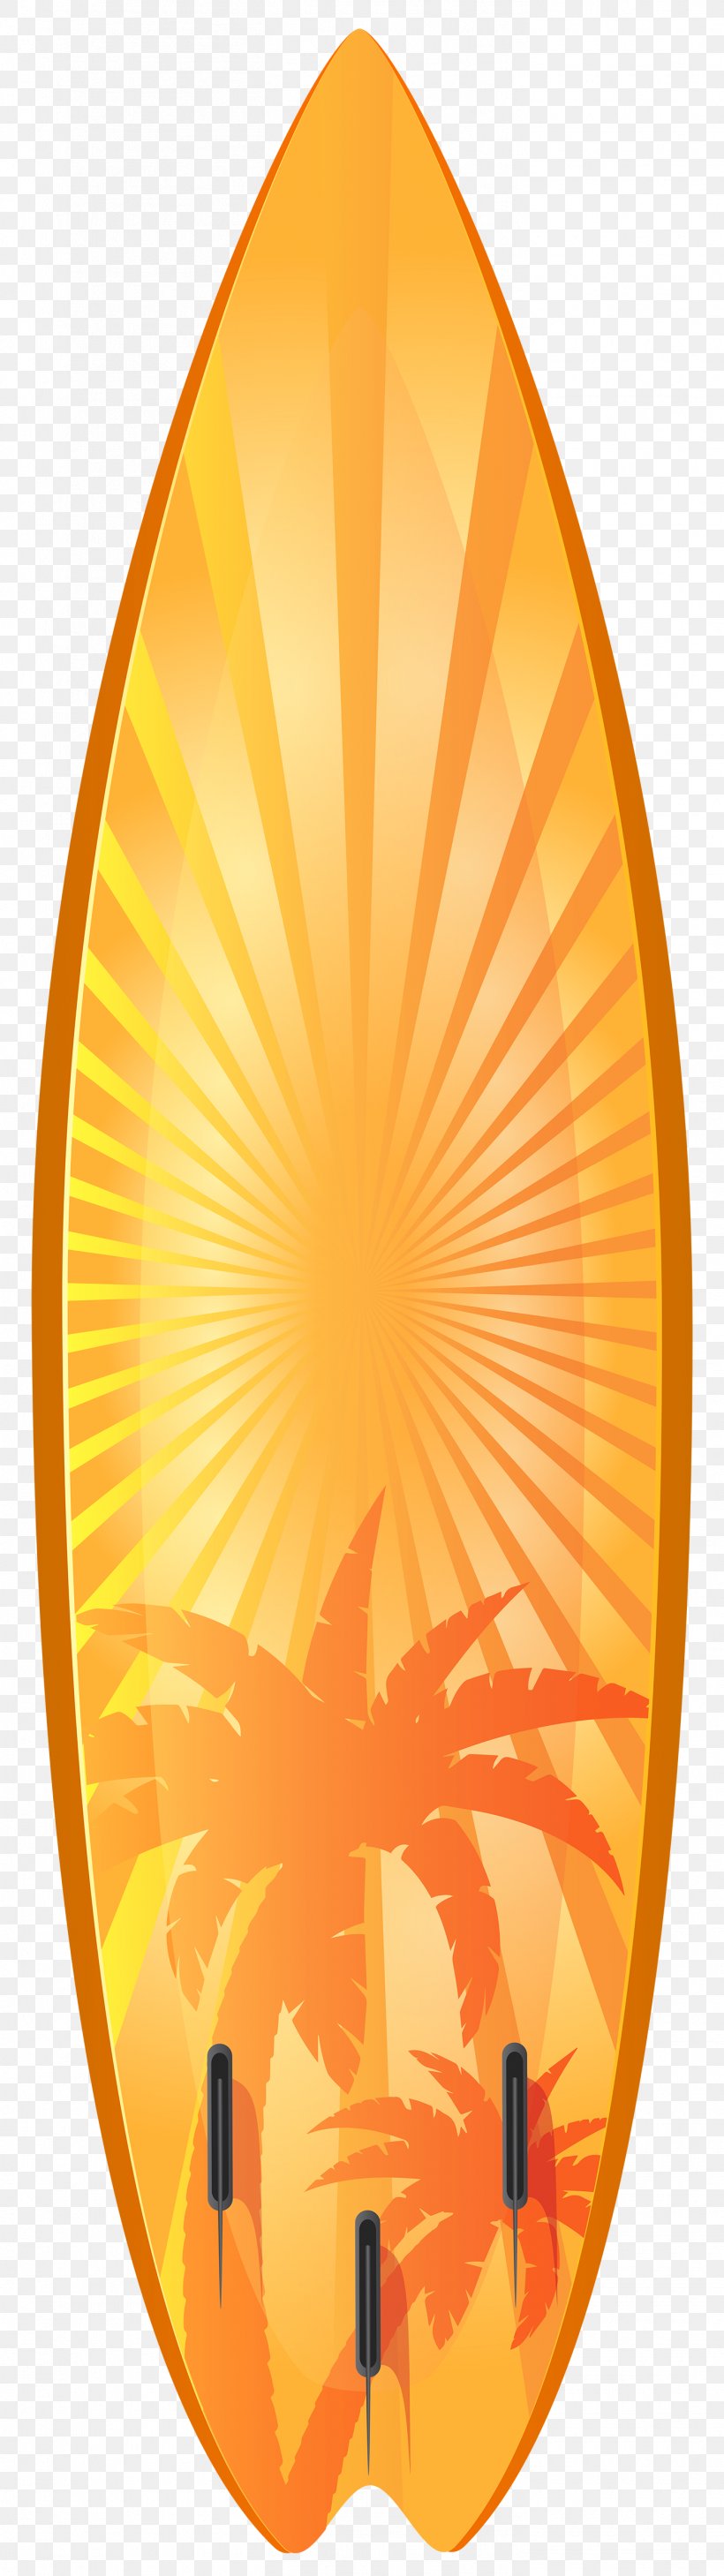 Surfboard Surfing Clip Art, PNG, 1405x5000px, Surfboard, Beach, Orange, Produce, Surfing Download Free